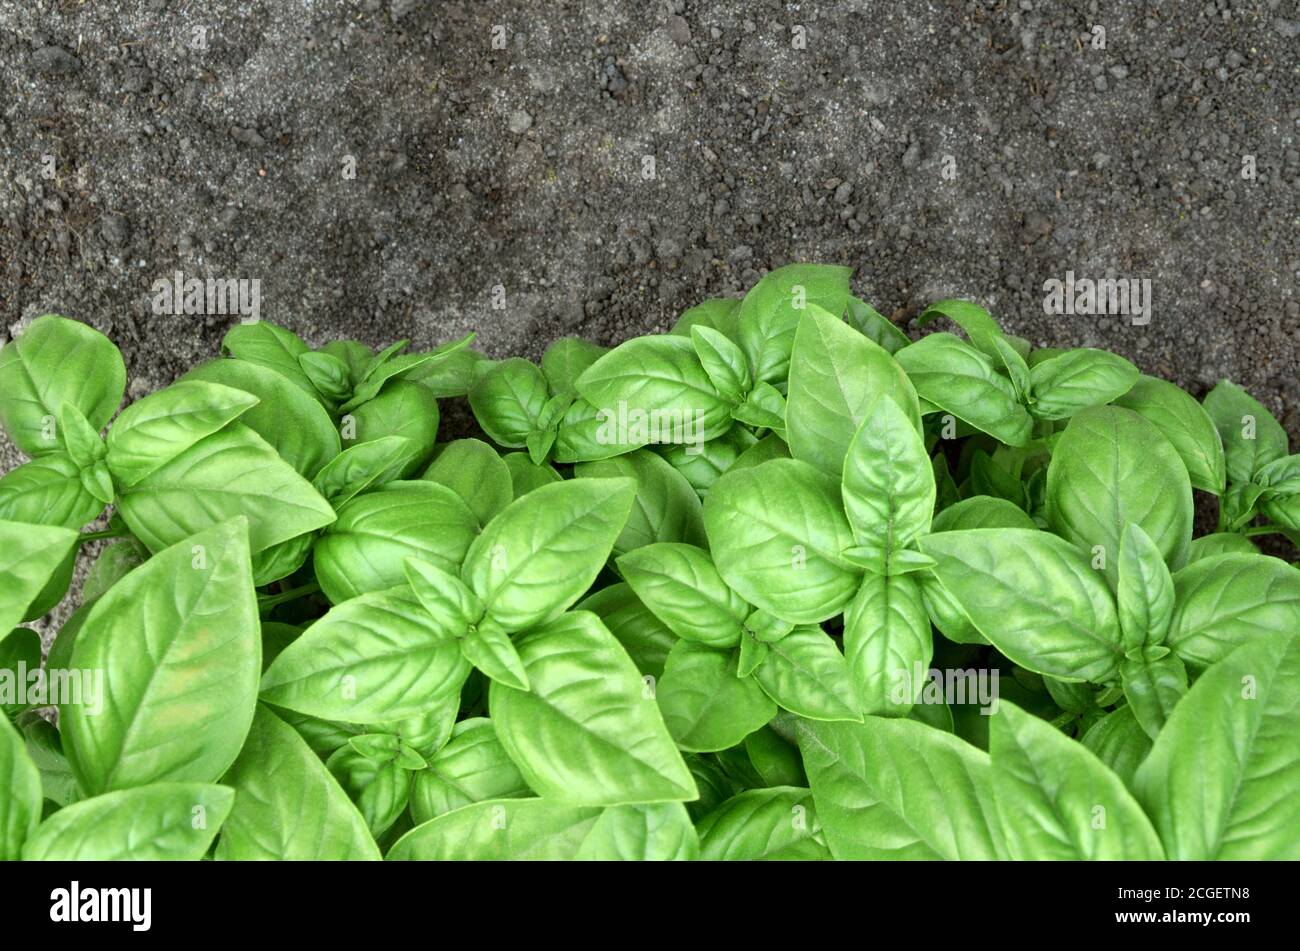 Fresh green basil and black soil as a nature background. Top view, copy space Stock Photo